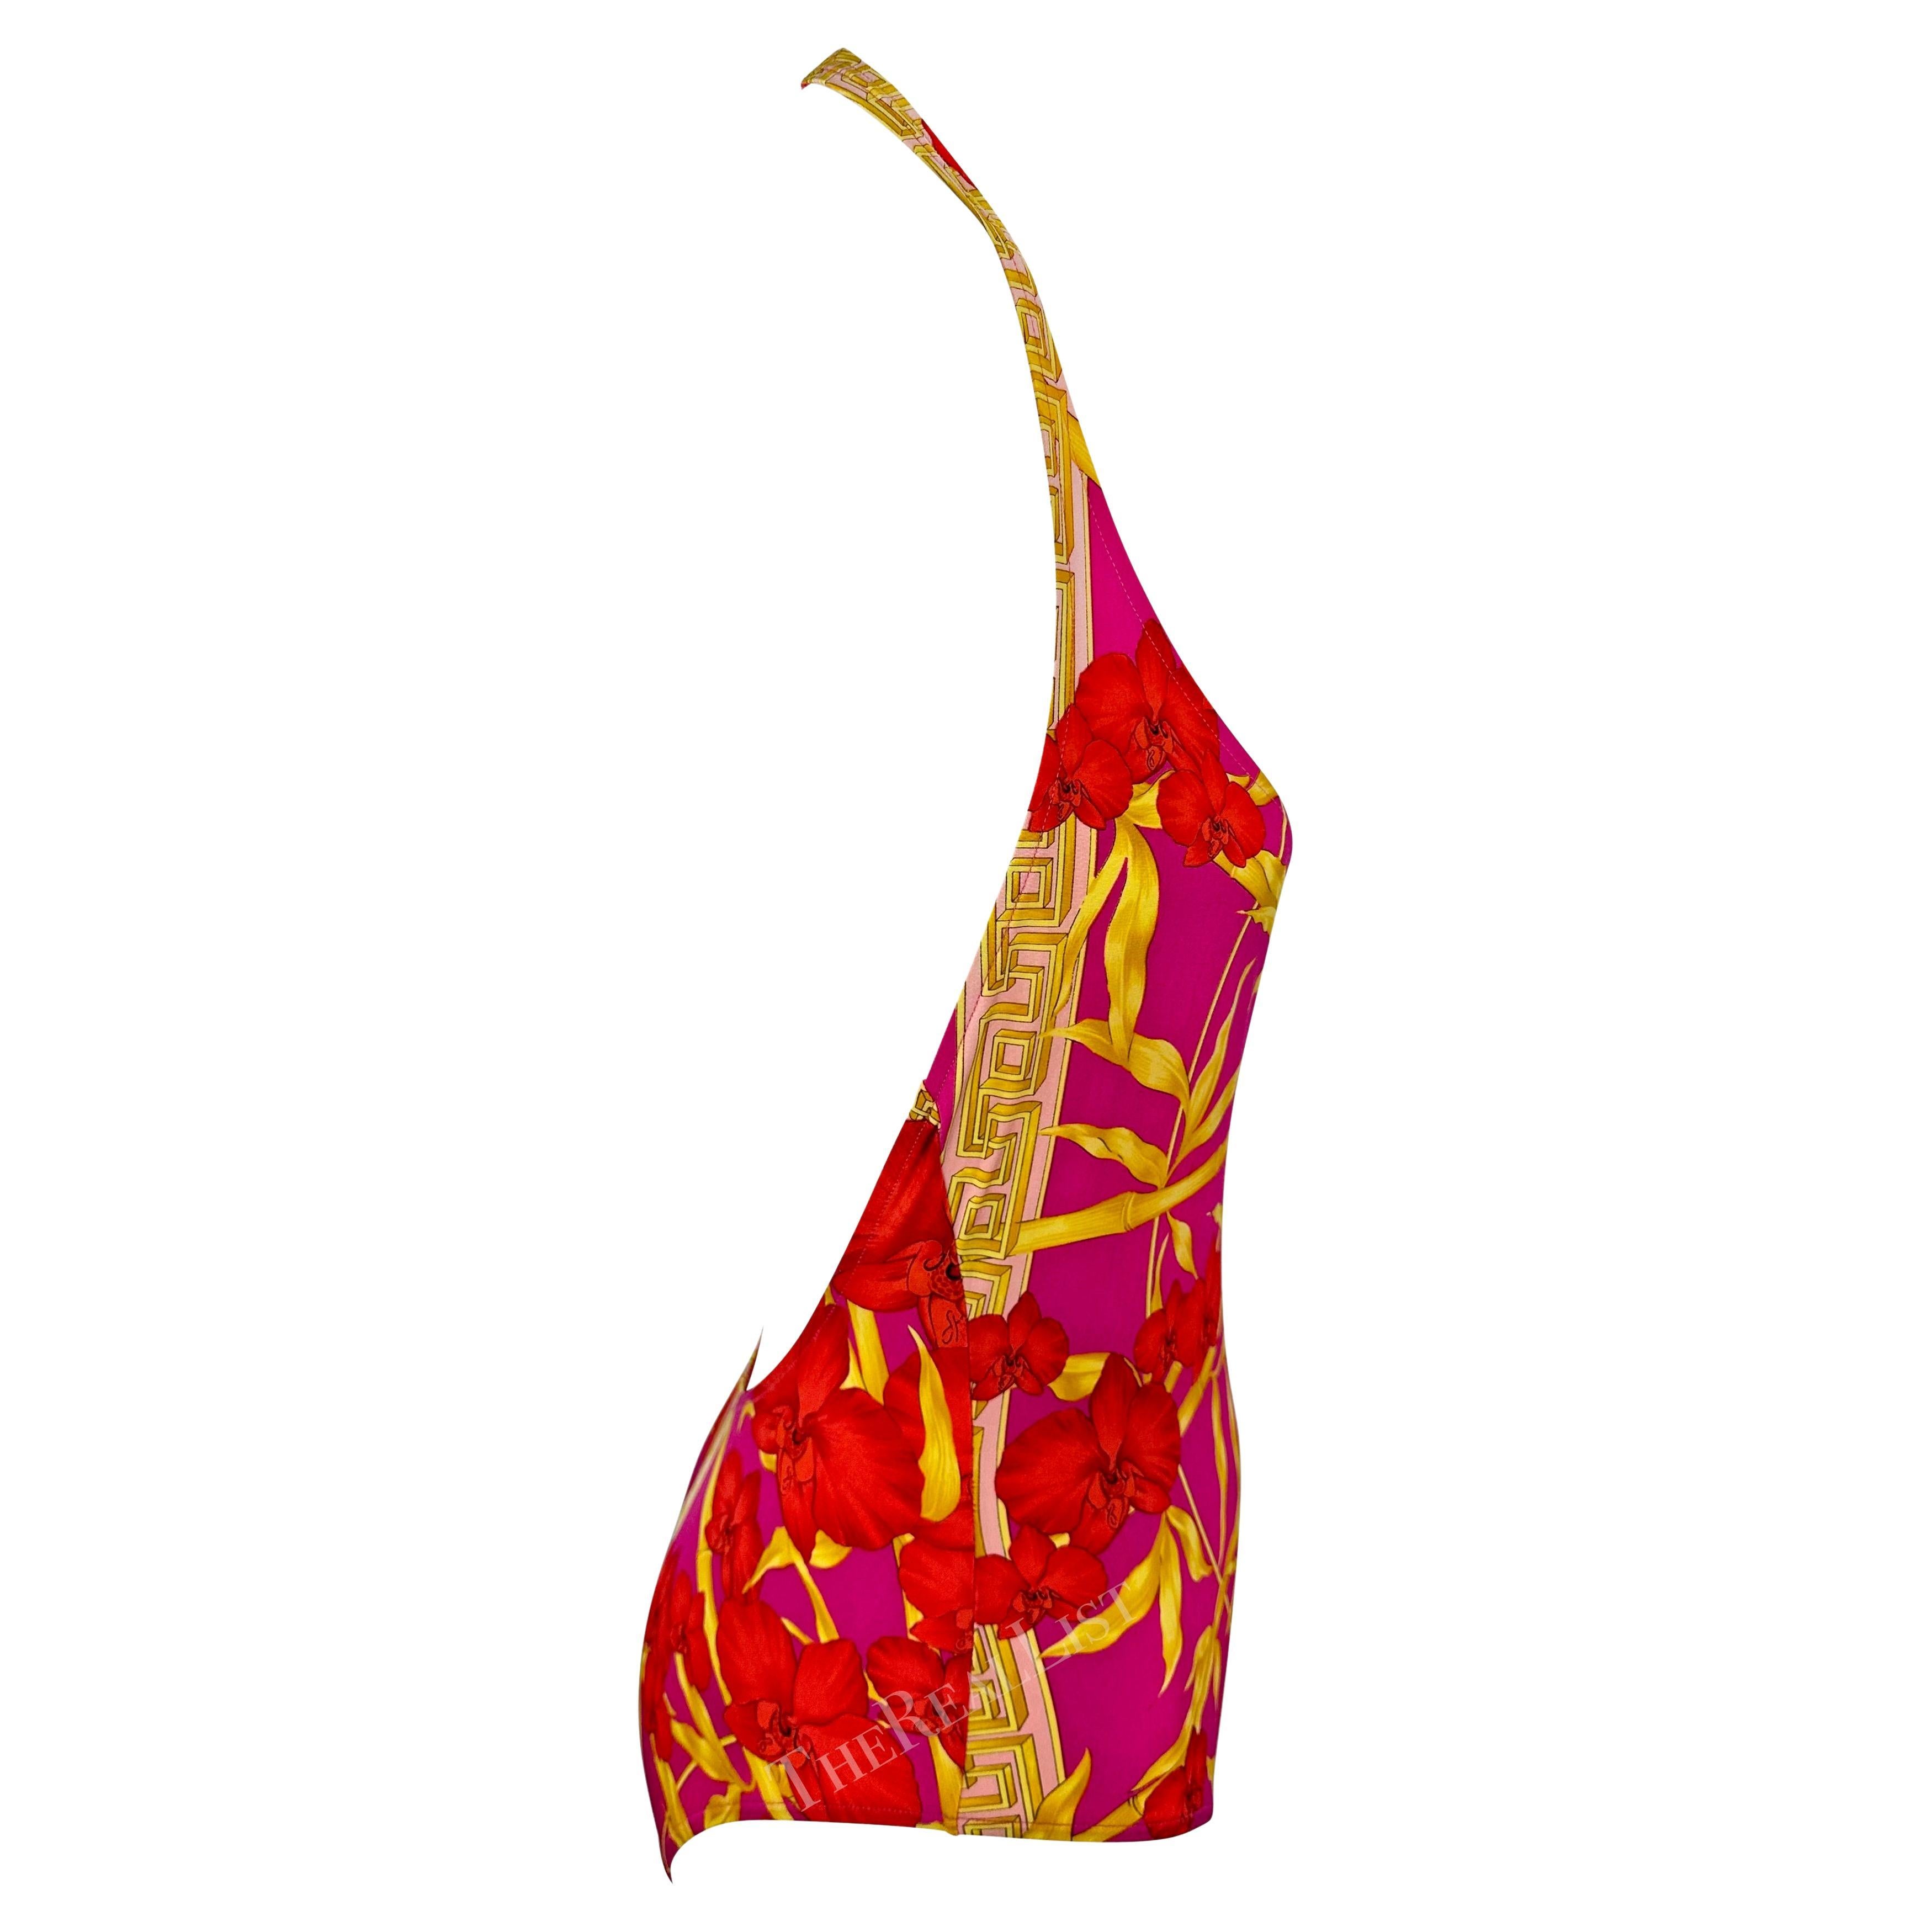 S/S 2000 Versace by Donatella Hot Pink Bamboo Plunging Halter One-Piece Swimsuit For Sale 2